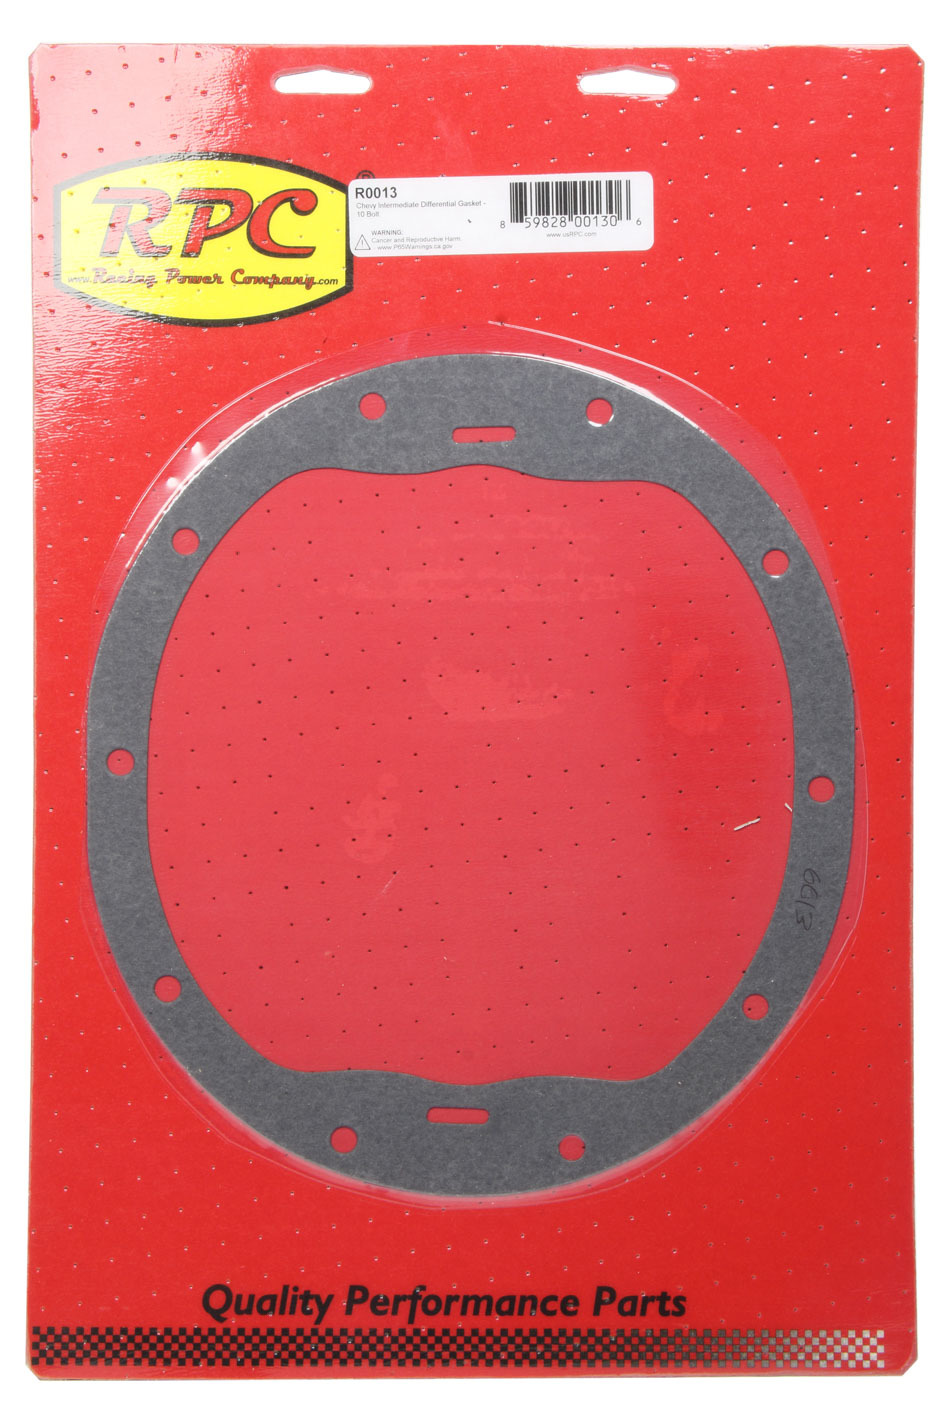 Racing Power Company R0013 Differential Cover Gasket, Compressed Fiber, GM 10-Bolt, Each